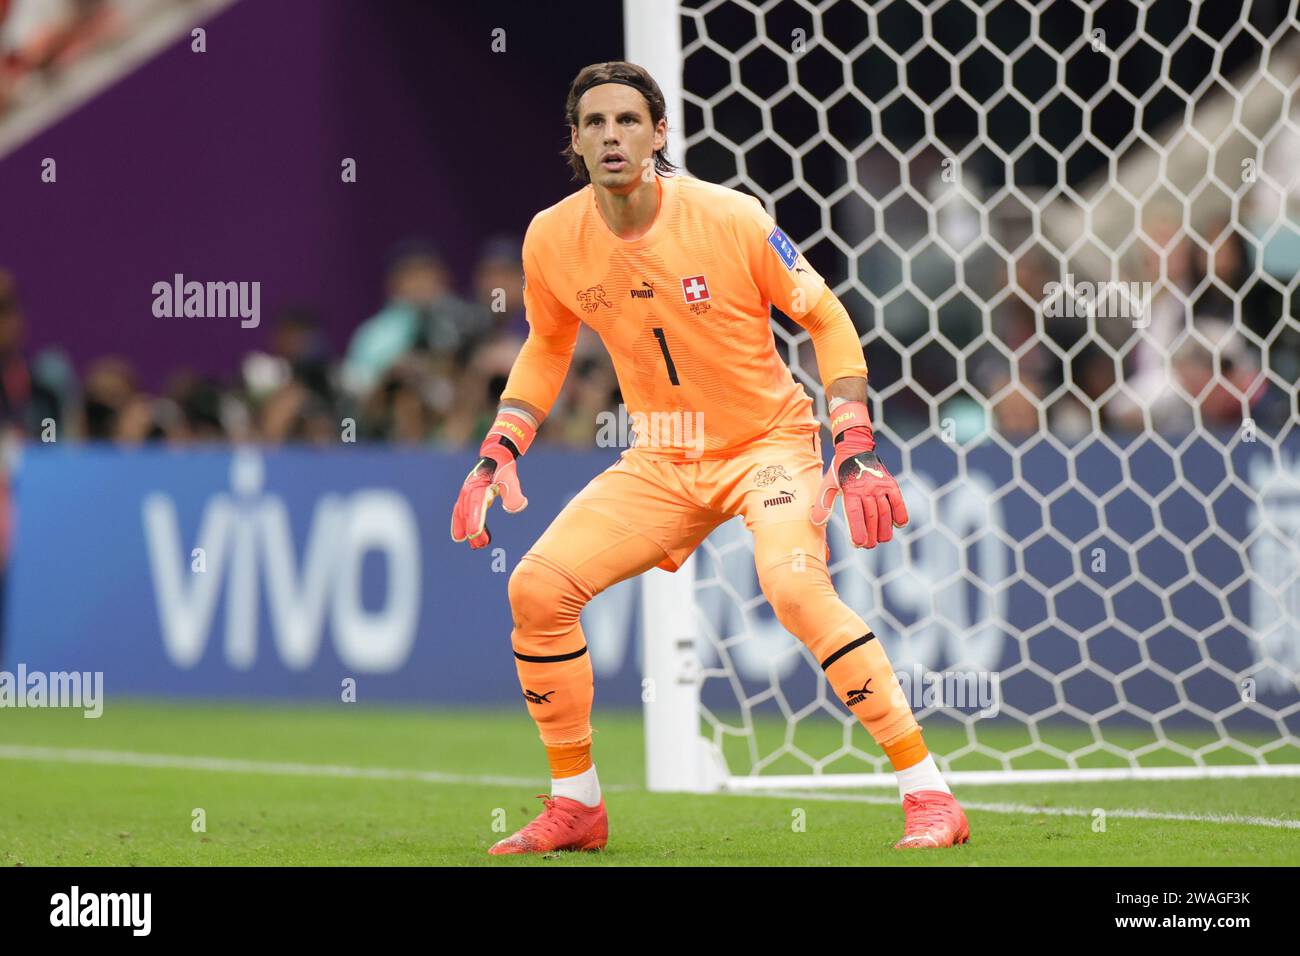 Qatar, Qatar. 06th Dec, 2022. Yann Sommer of Switzerland seen in action during the FIFA World Cup Qatar 2022 match between Portugal and Switzerland at Lusail Stadium. Final score: Portugal 6:1 Switzerland. (Photo by Grzegorz Wajda/SOPA Images/Sipa USA) Credit: Sipa USA/Alamy Live News Stock Photo